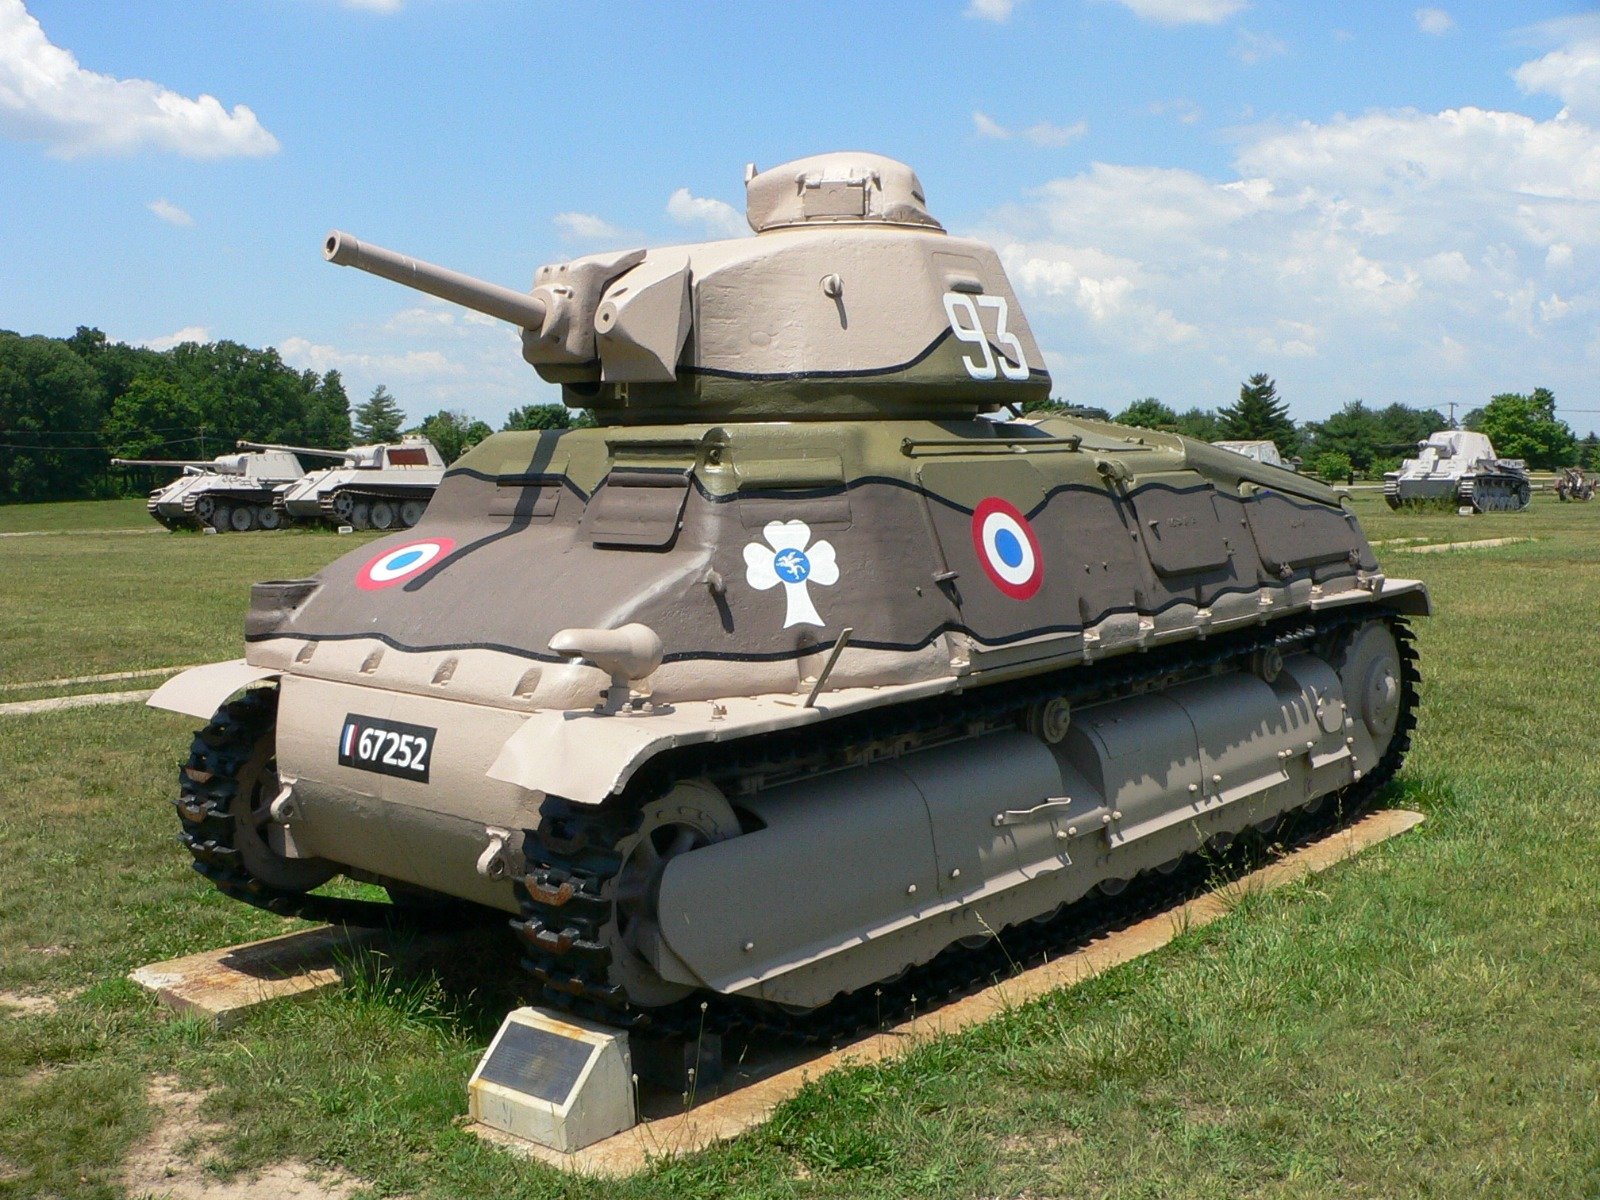 how often were tanks used in wwii battles